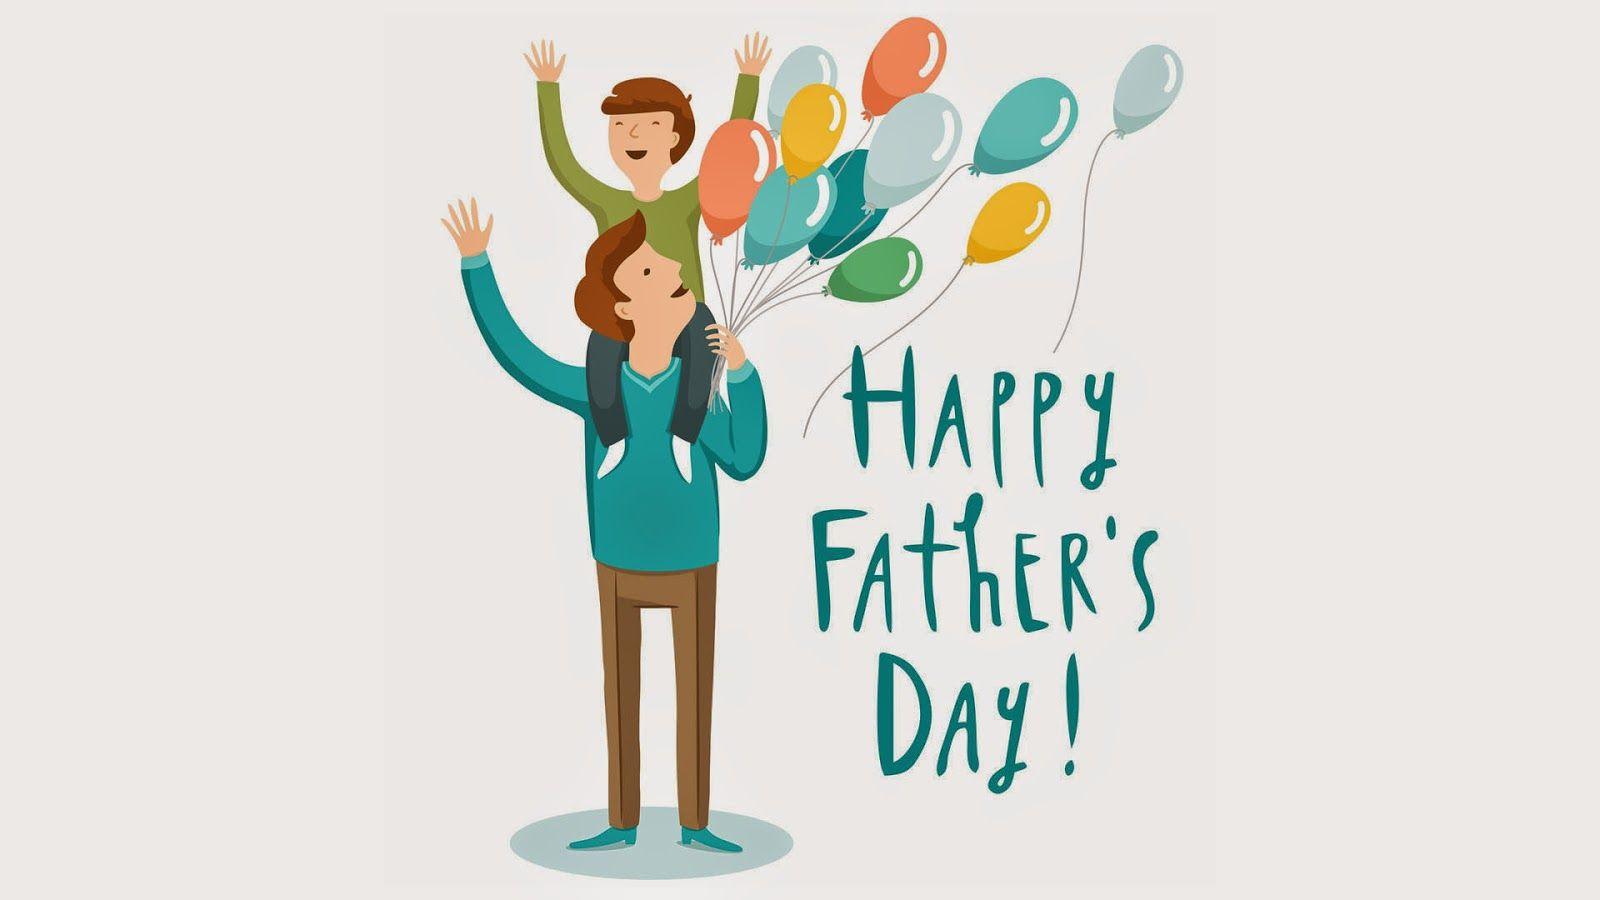 Happy Fathers Day Image 2018: Fathers Day Pictures, Photos, Pics